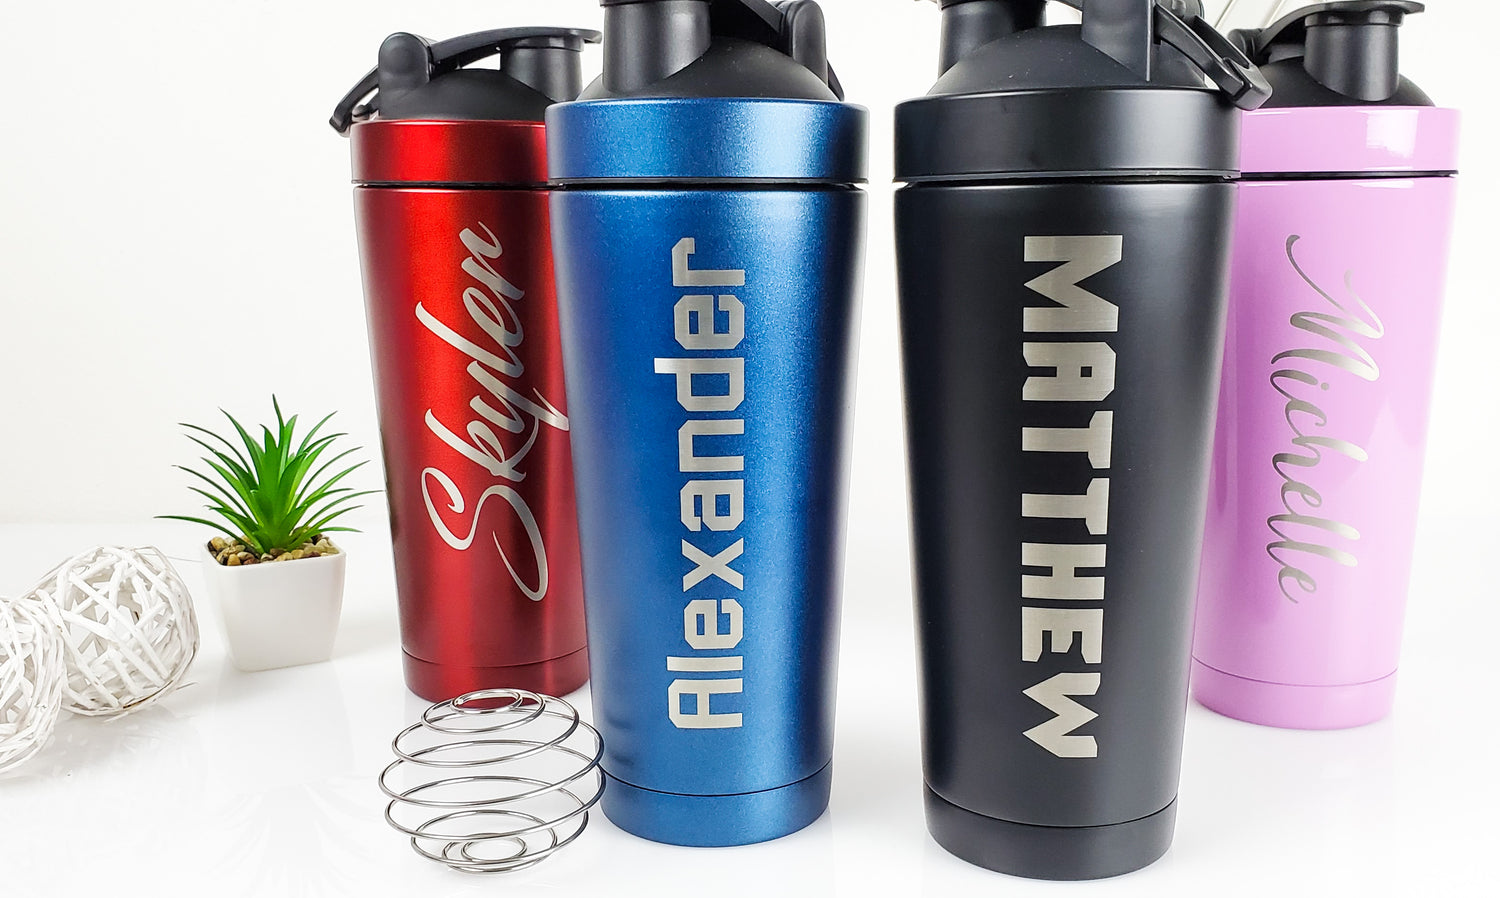 Personalized 24 oz. Olympian Plastic Shaker Bottles with Mixer